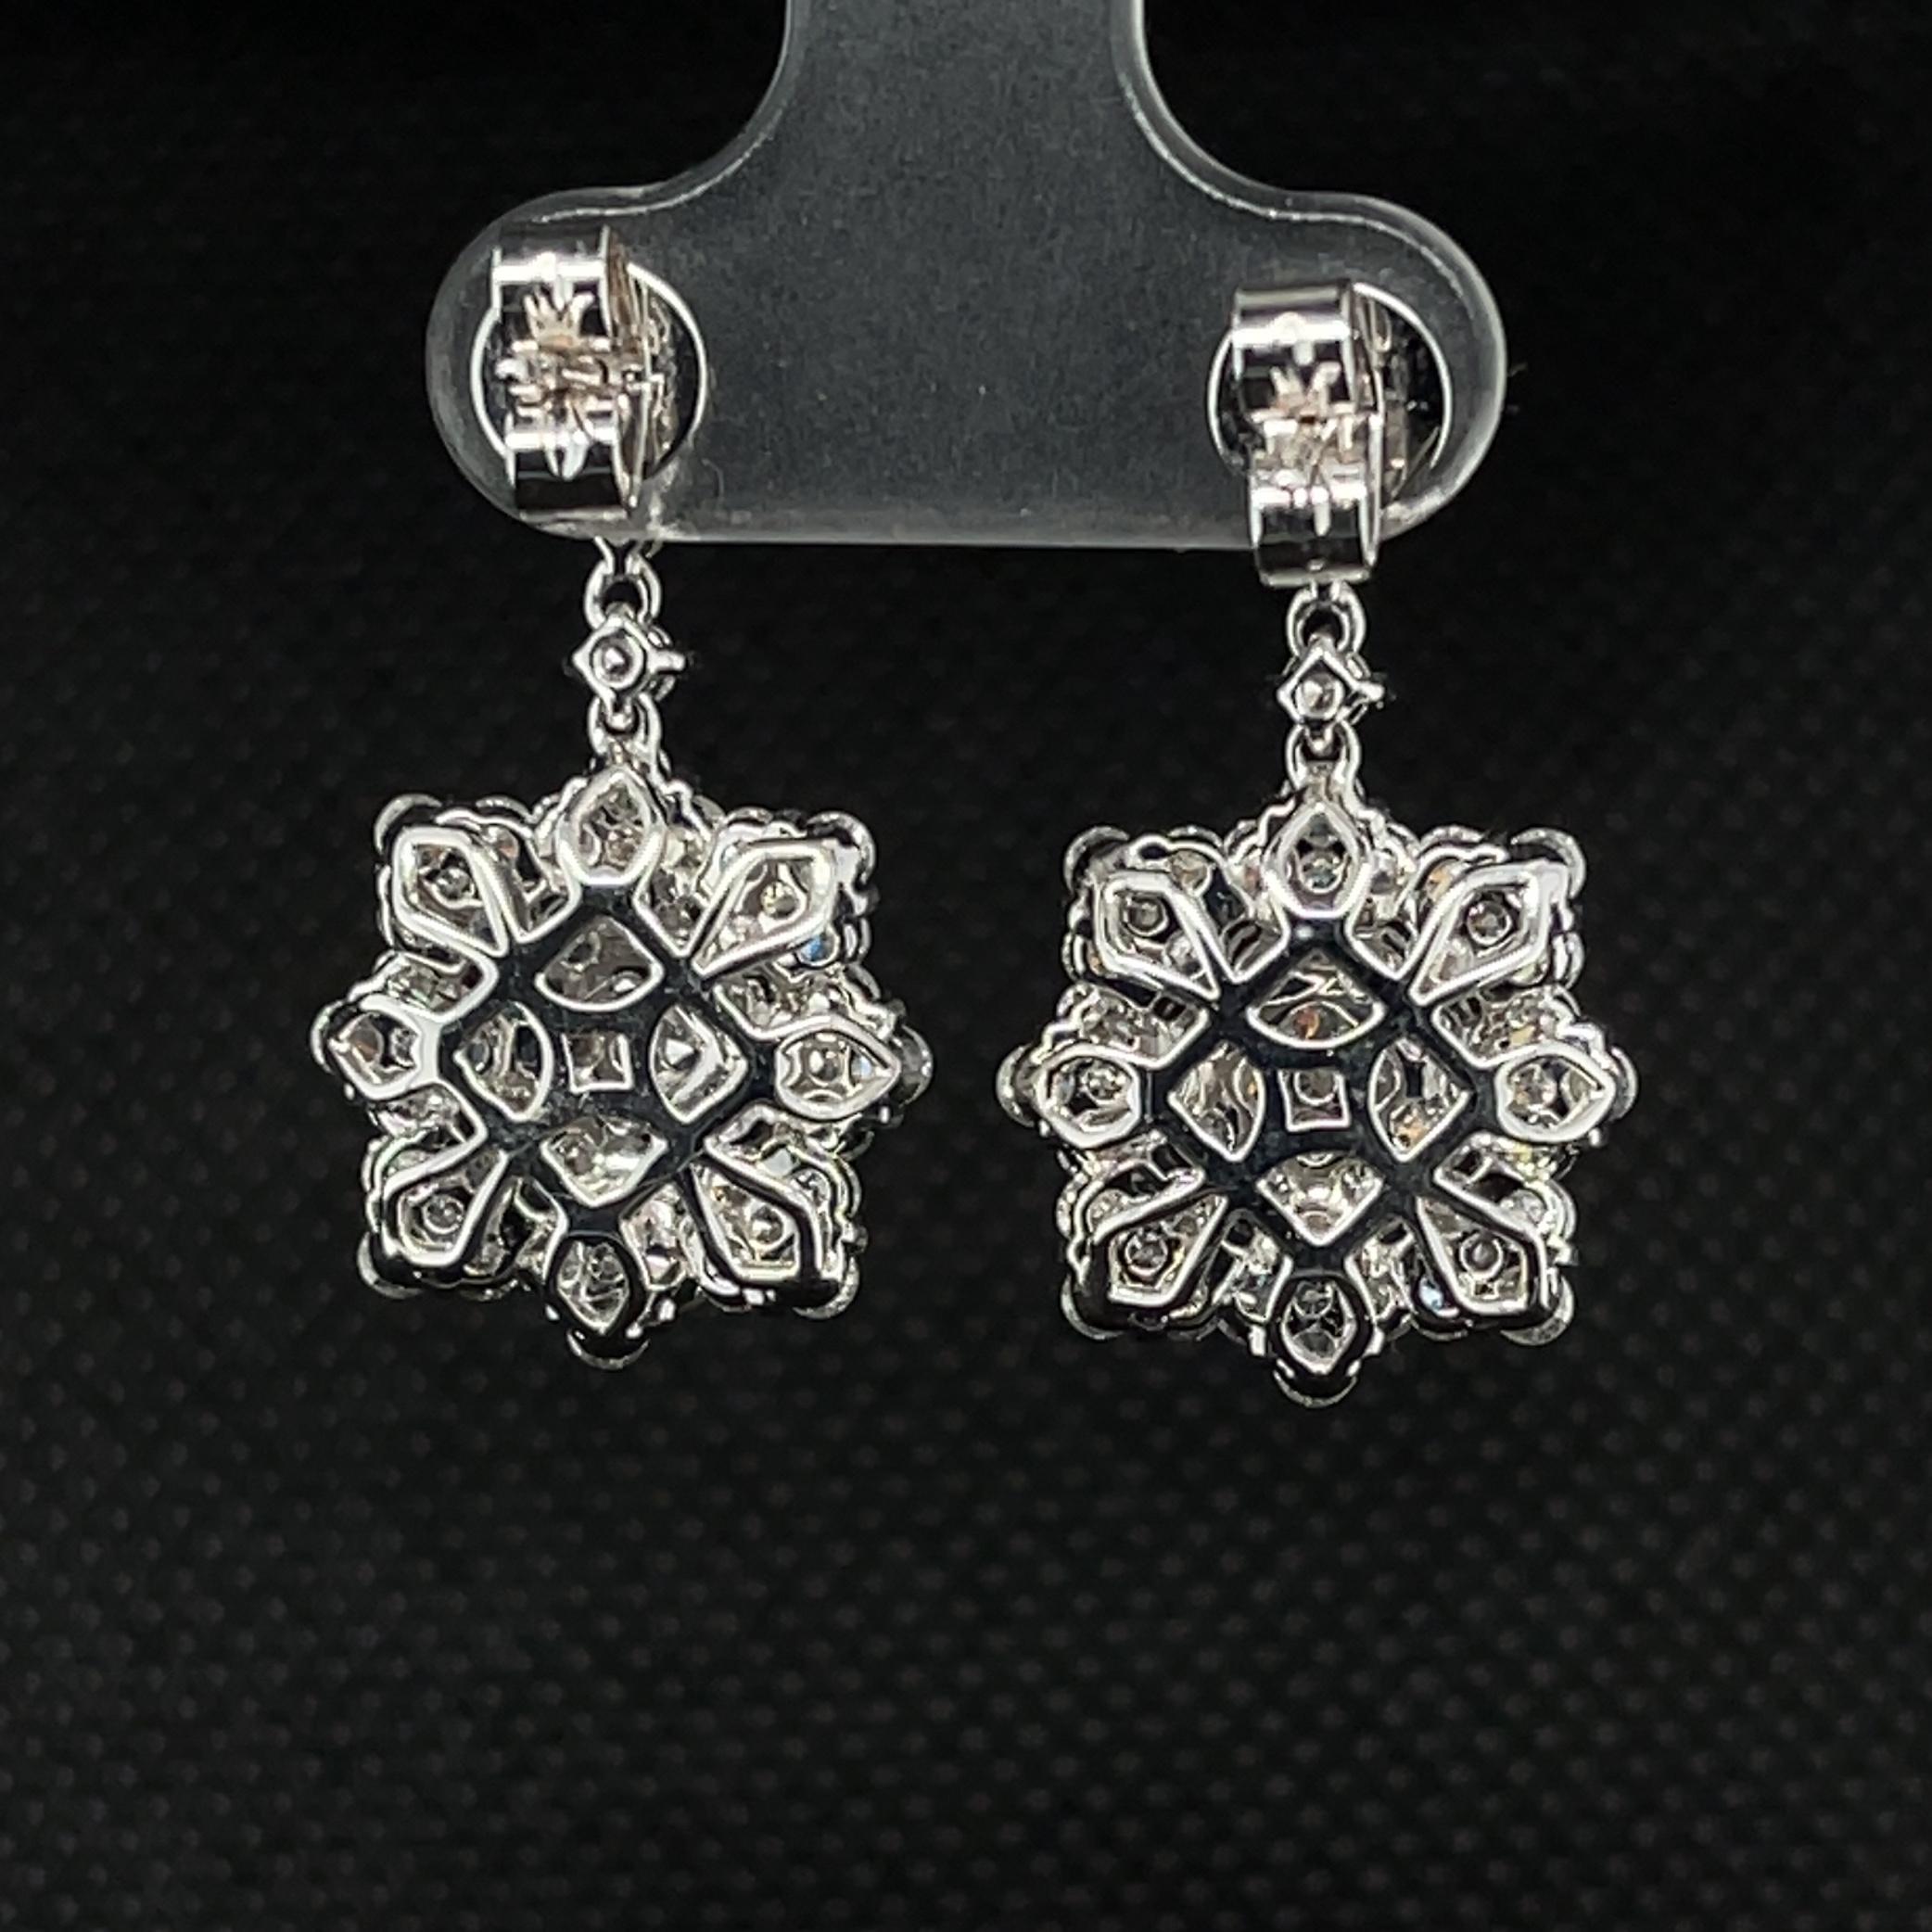 Round Cut Diamond Snowflake Drop Earrings in White Gold, 3.34 Carats Total For Sale